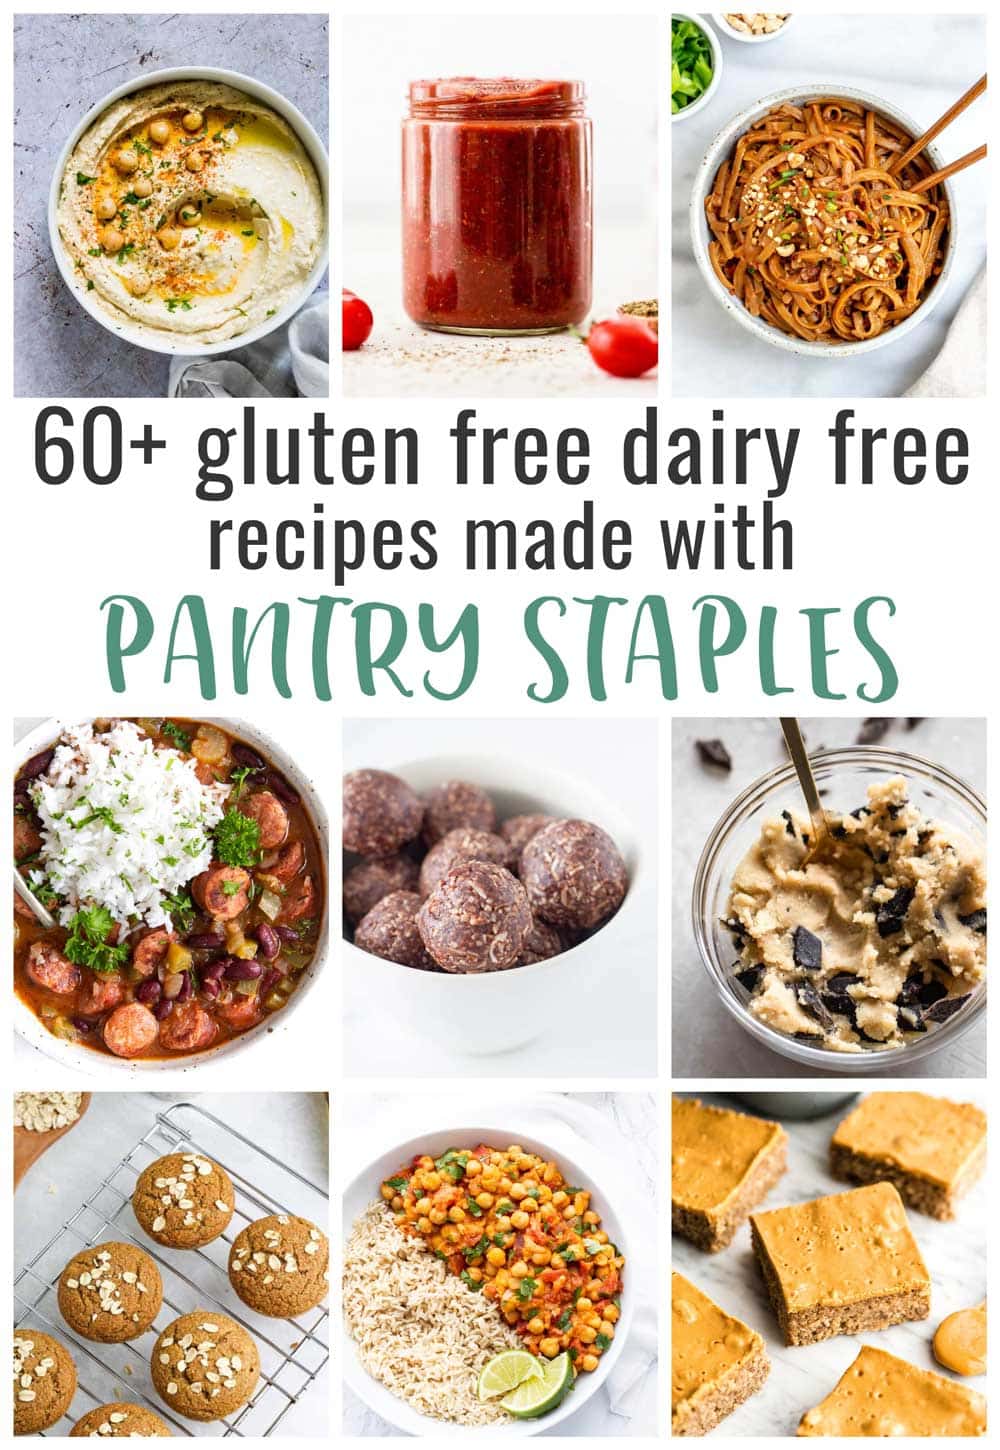 photo collage of various gluten free dairy free recipes made with pantry staples